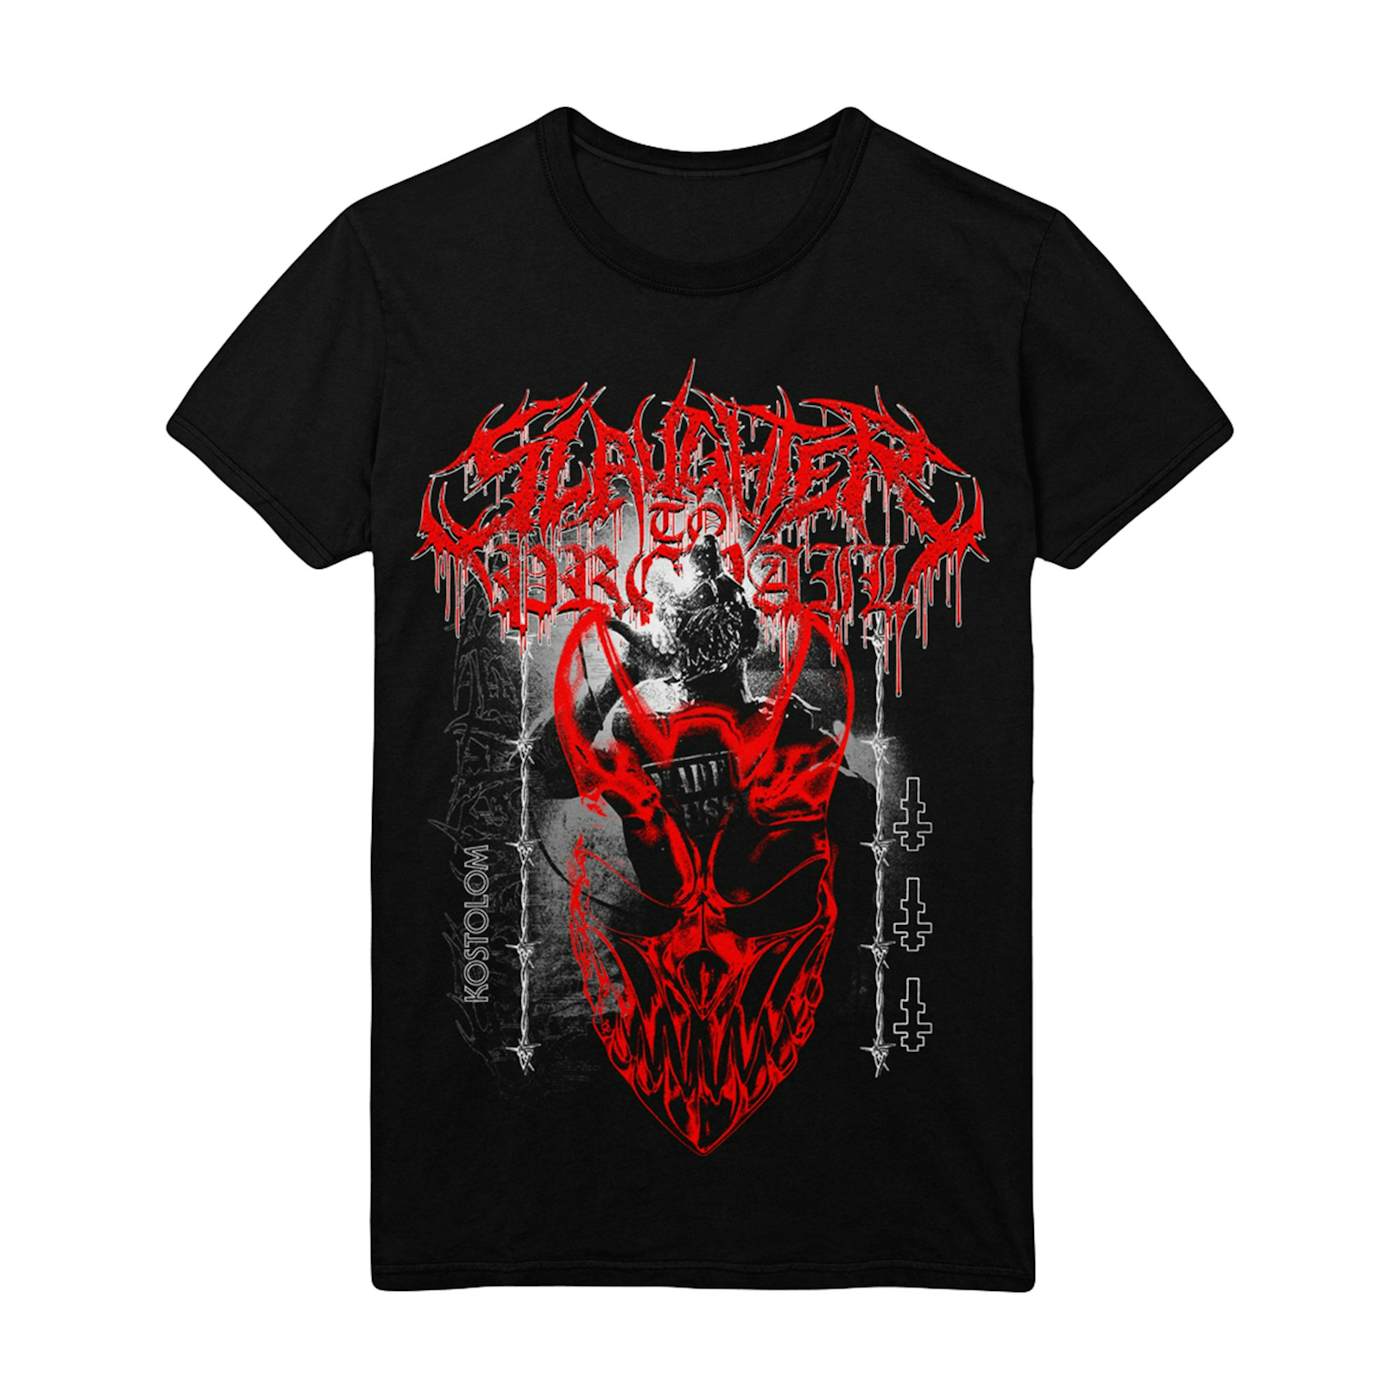 Slaughter To Prevail - 'Demolisher' Tee (Black)